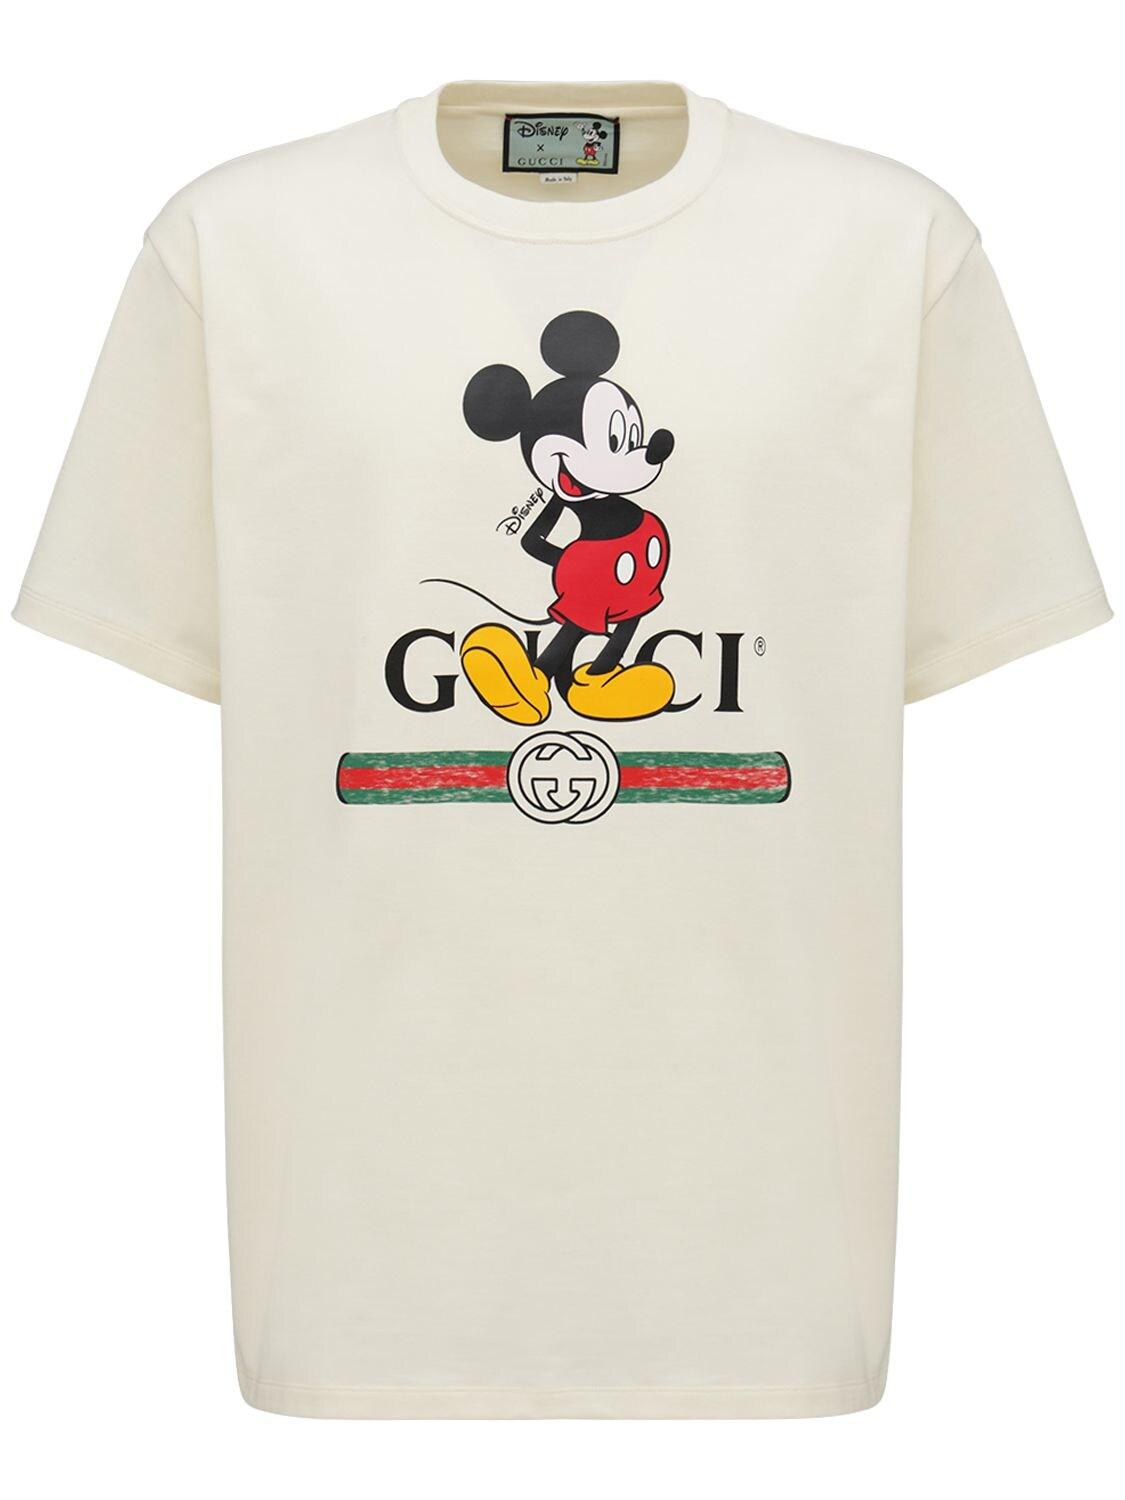  Gucci  Logo Mickey  Mouse Print Cotton T shirt  in White for 